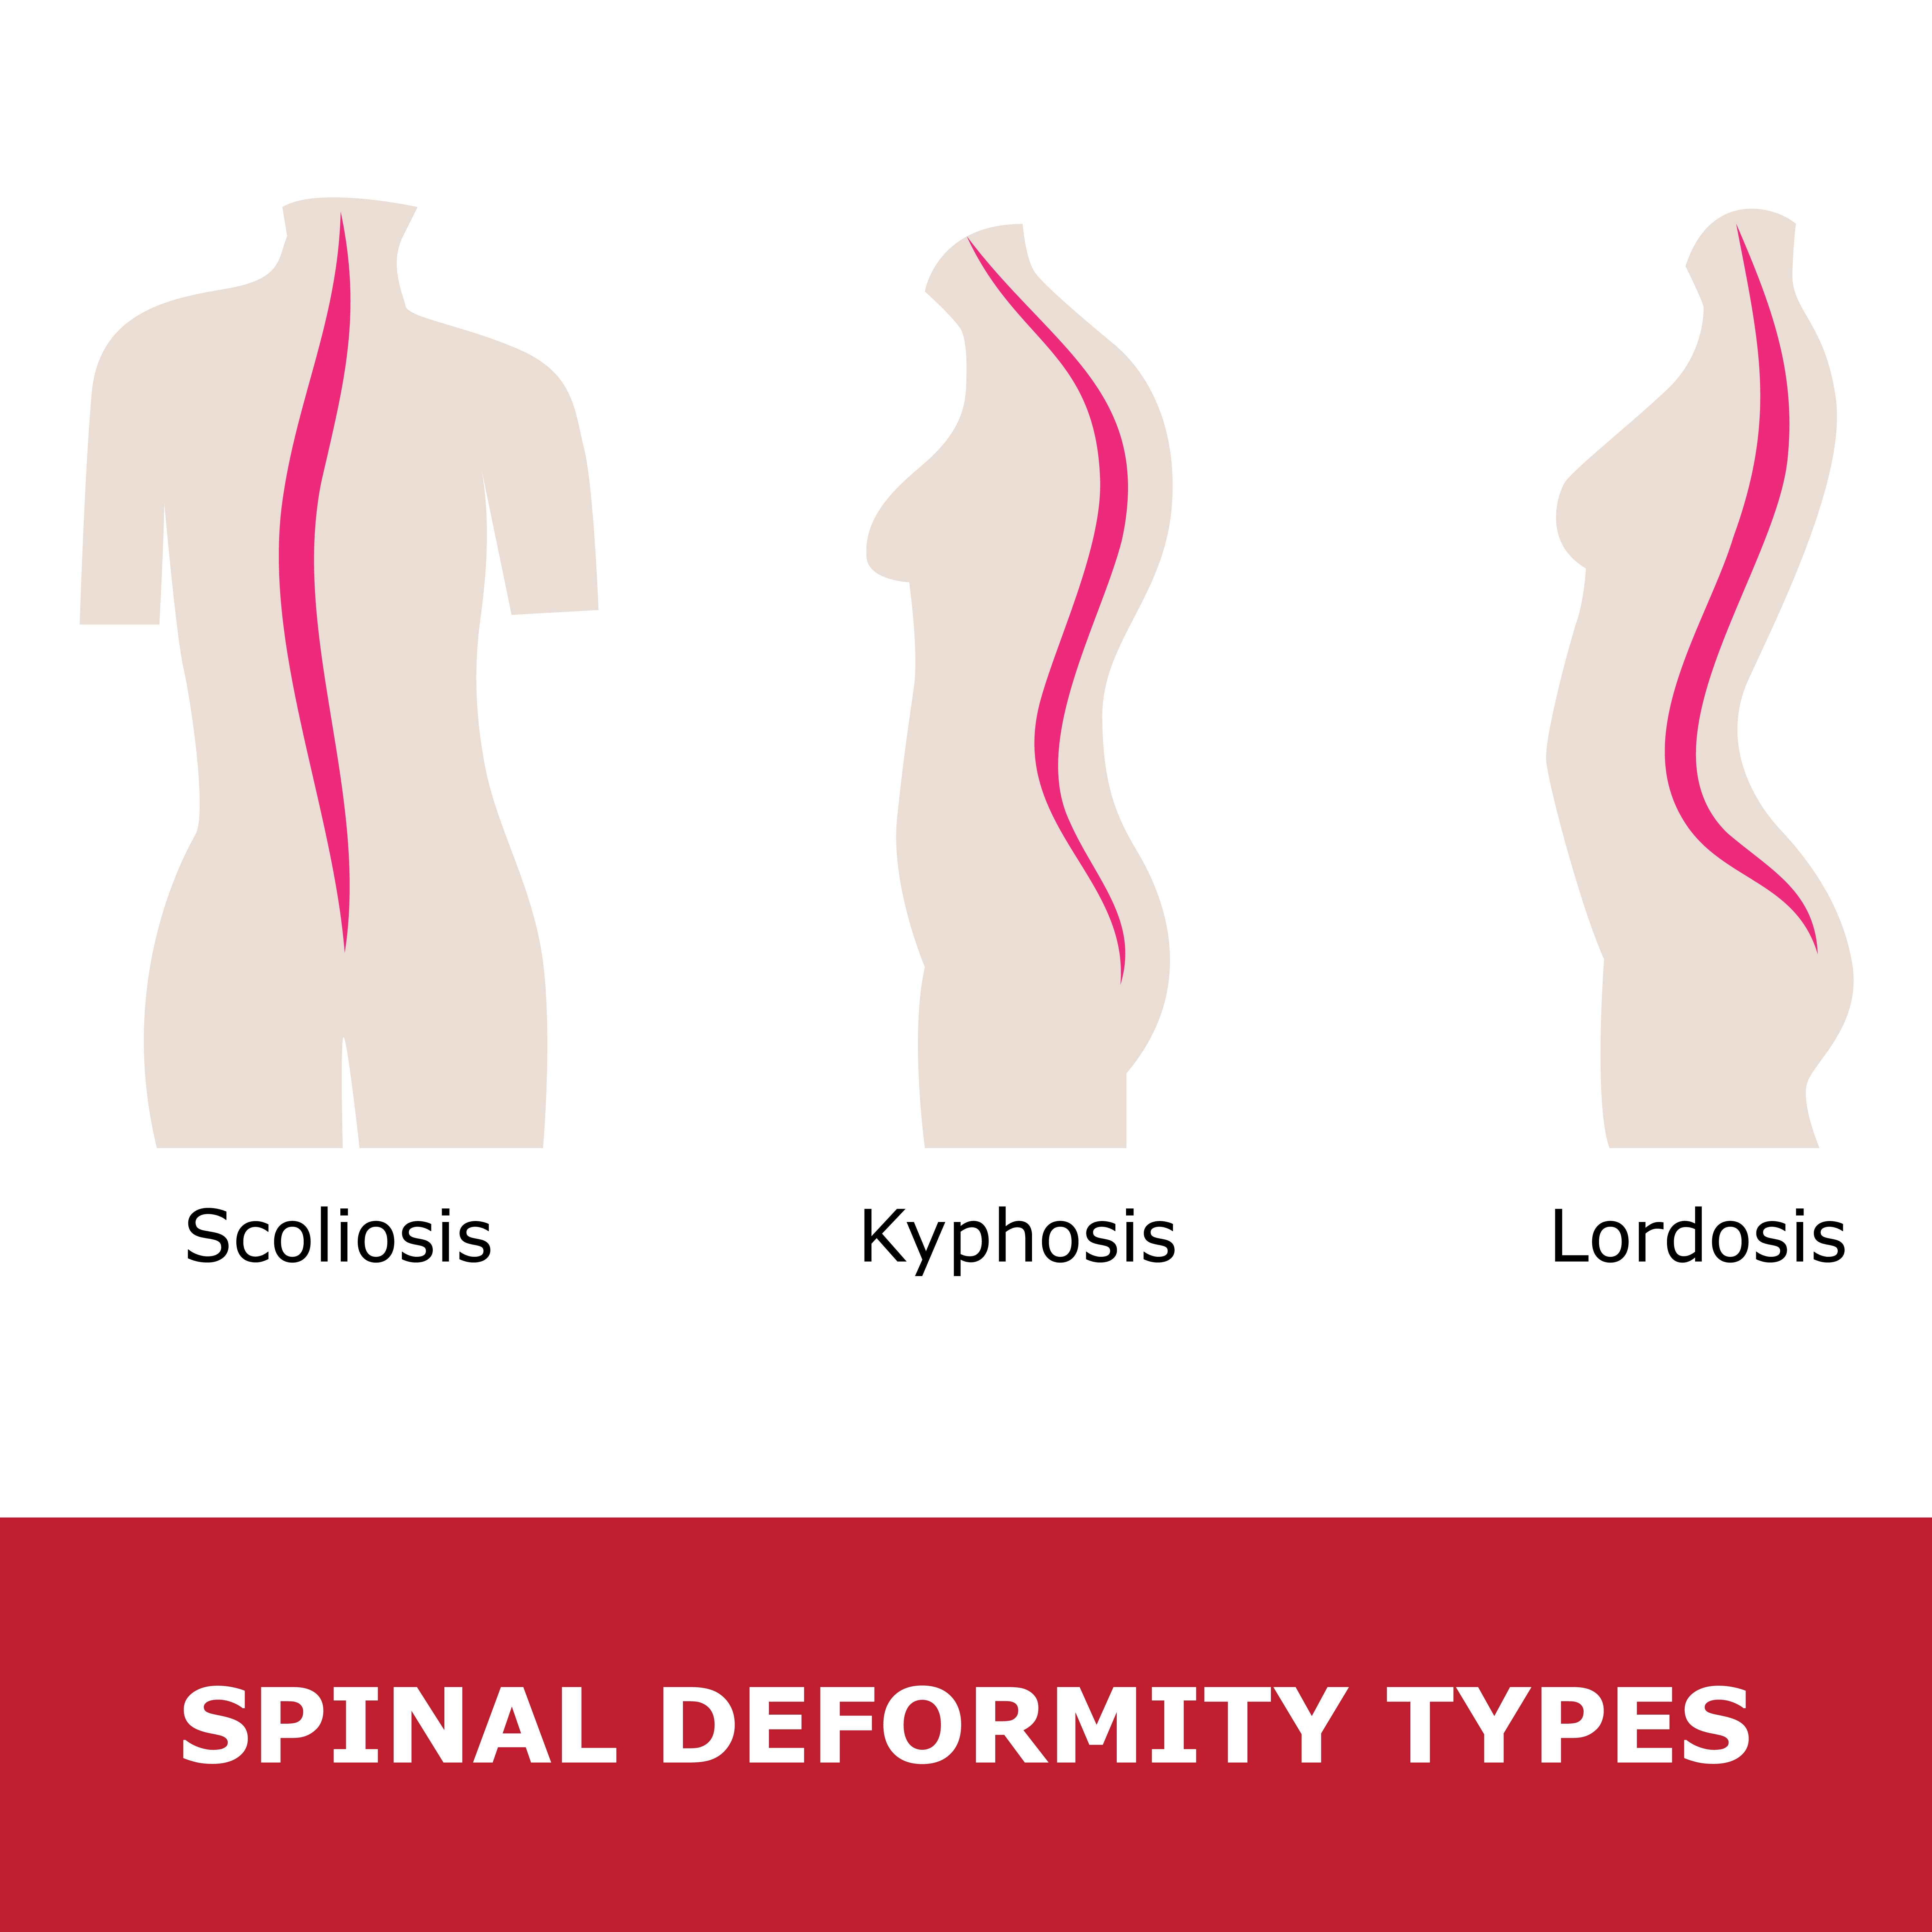 loss of lumbar lordosis due to muscle spasm